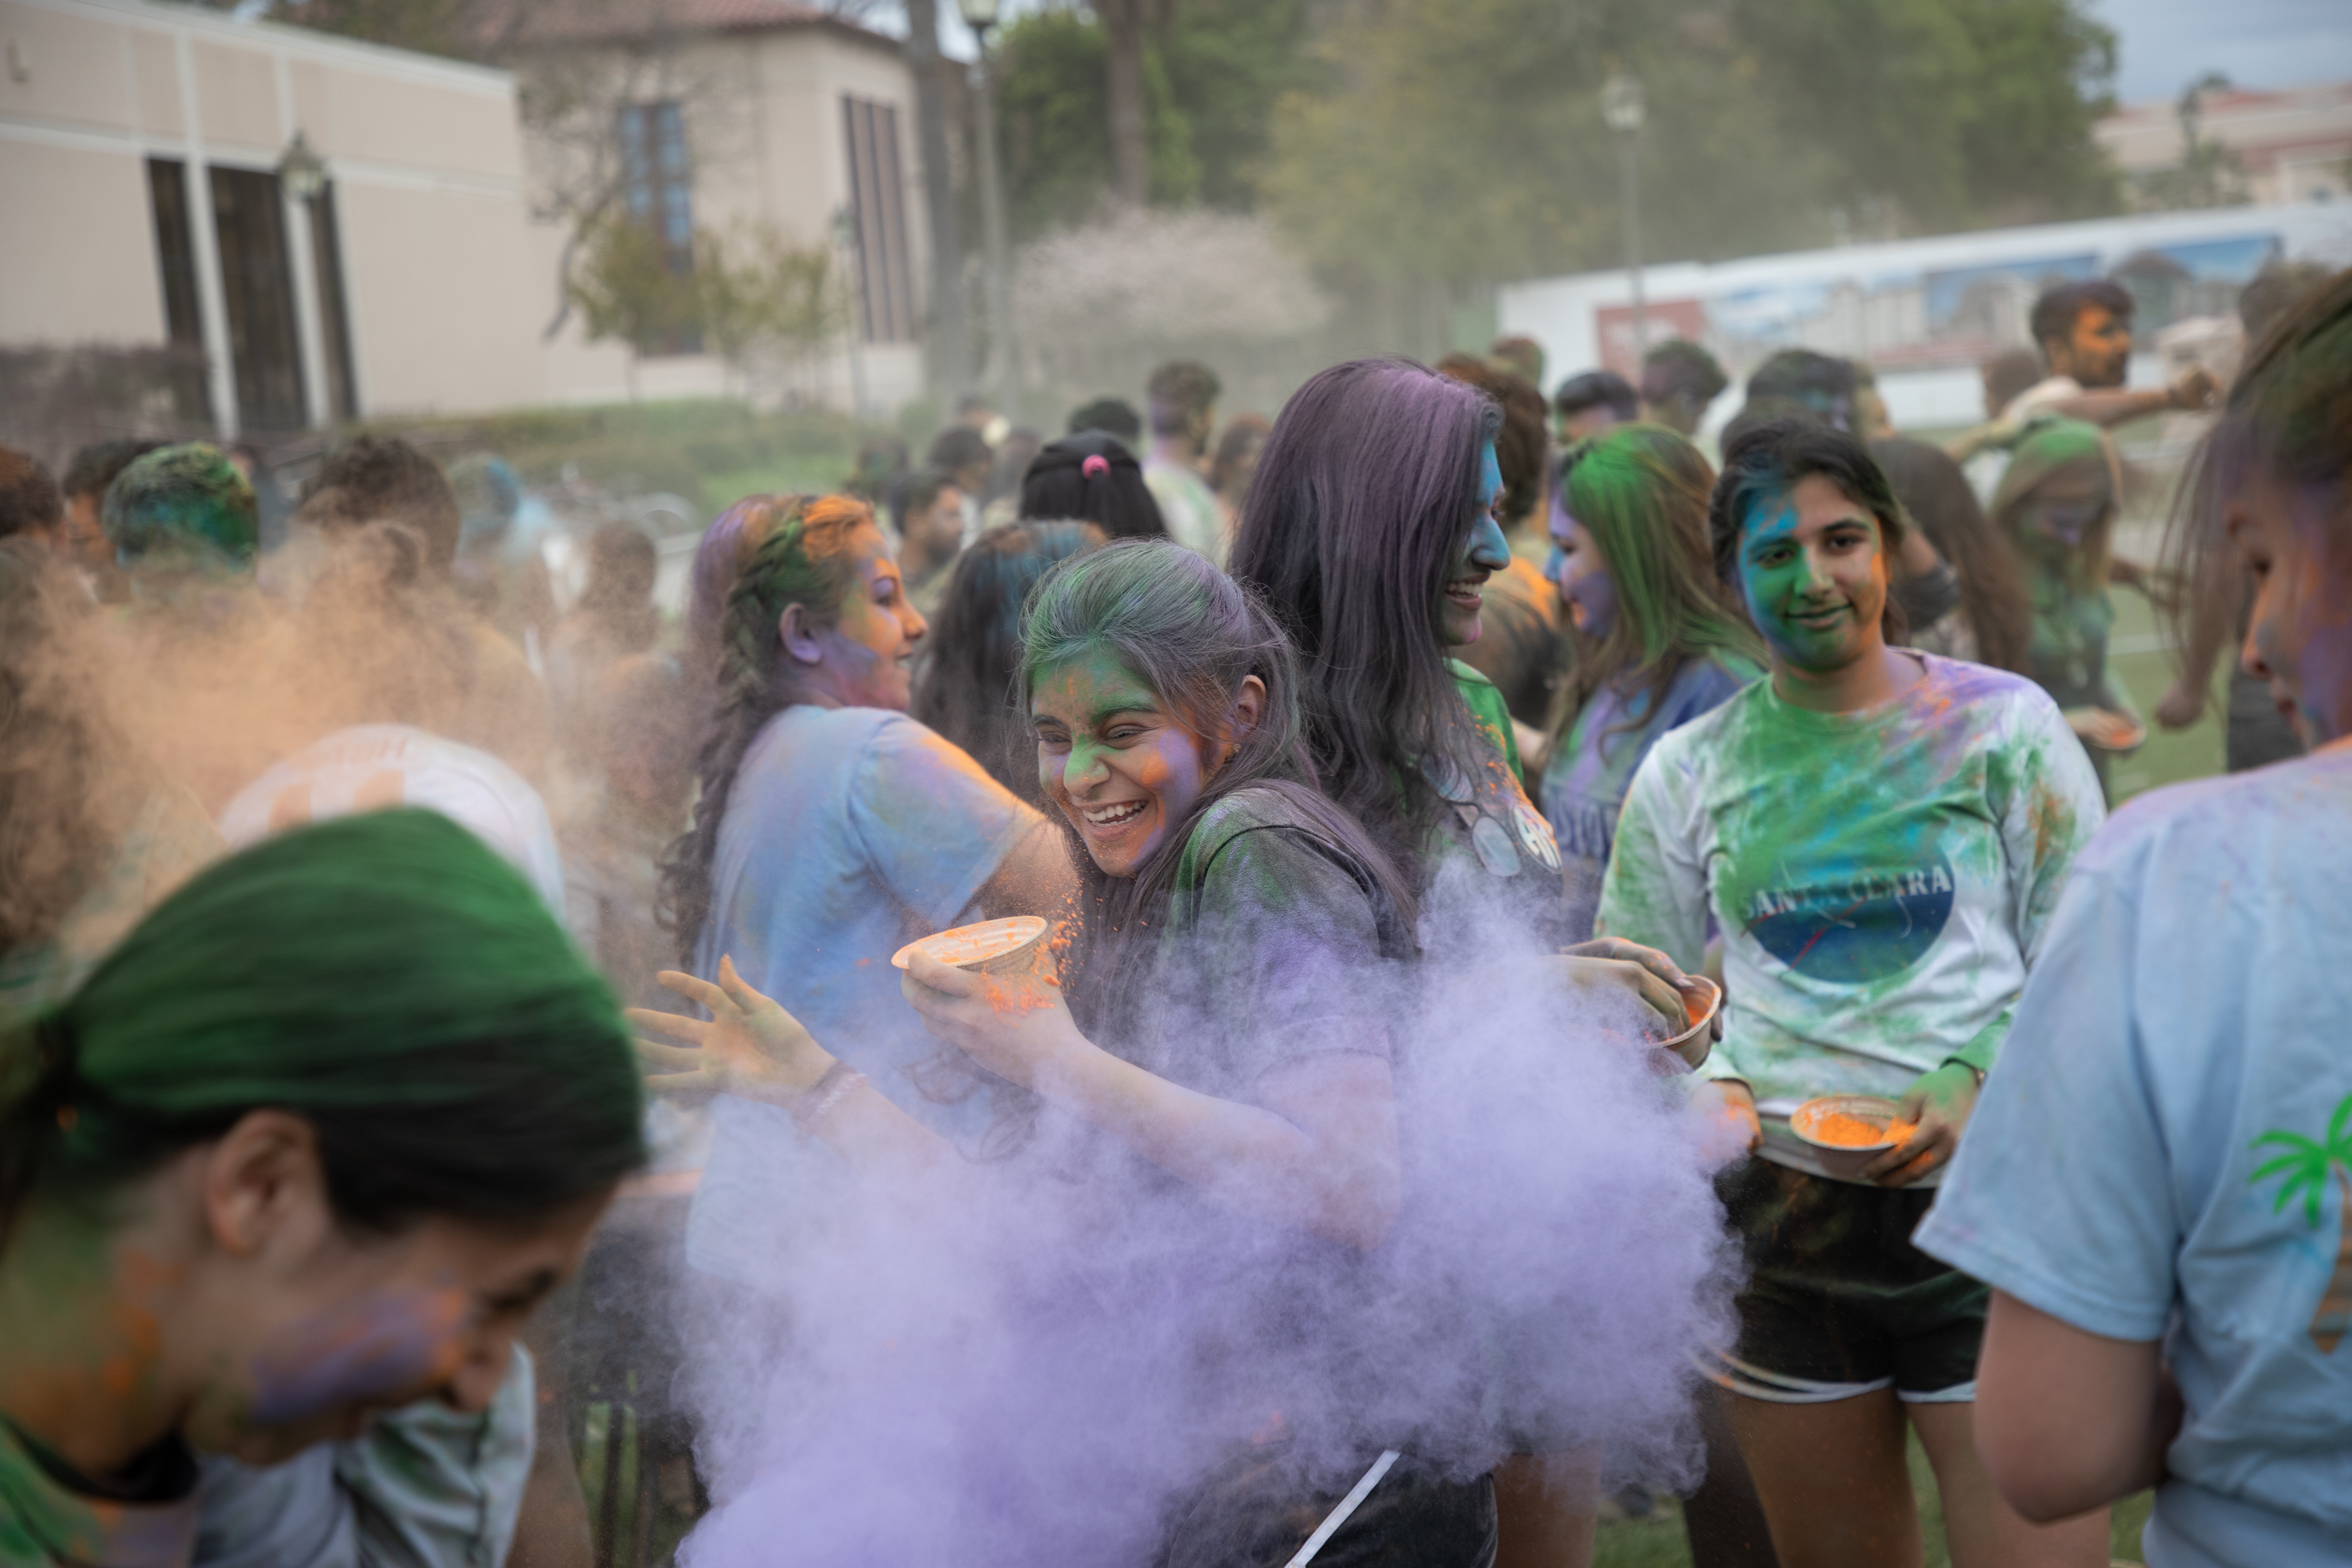 Clouds of color burst forward at the annual Holi festival